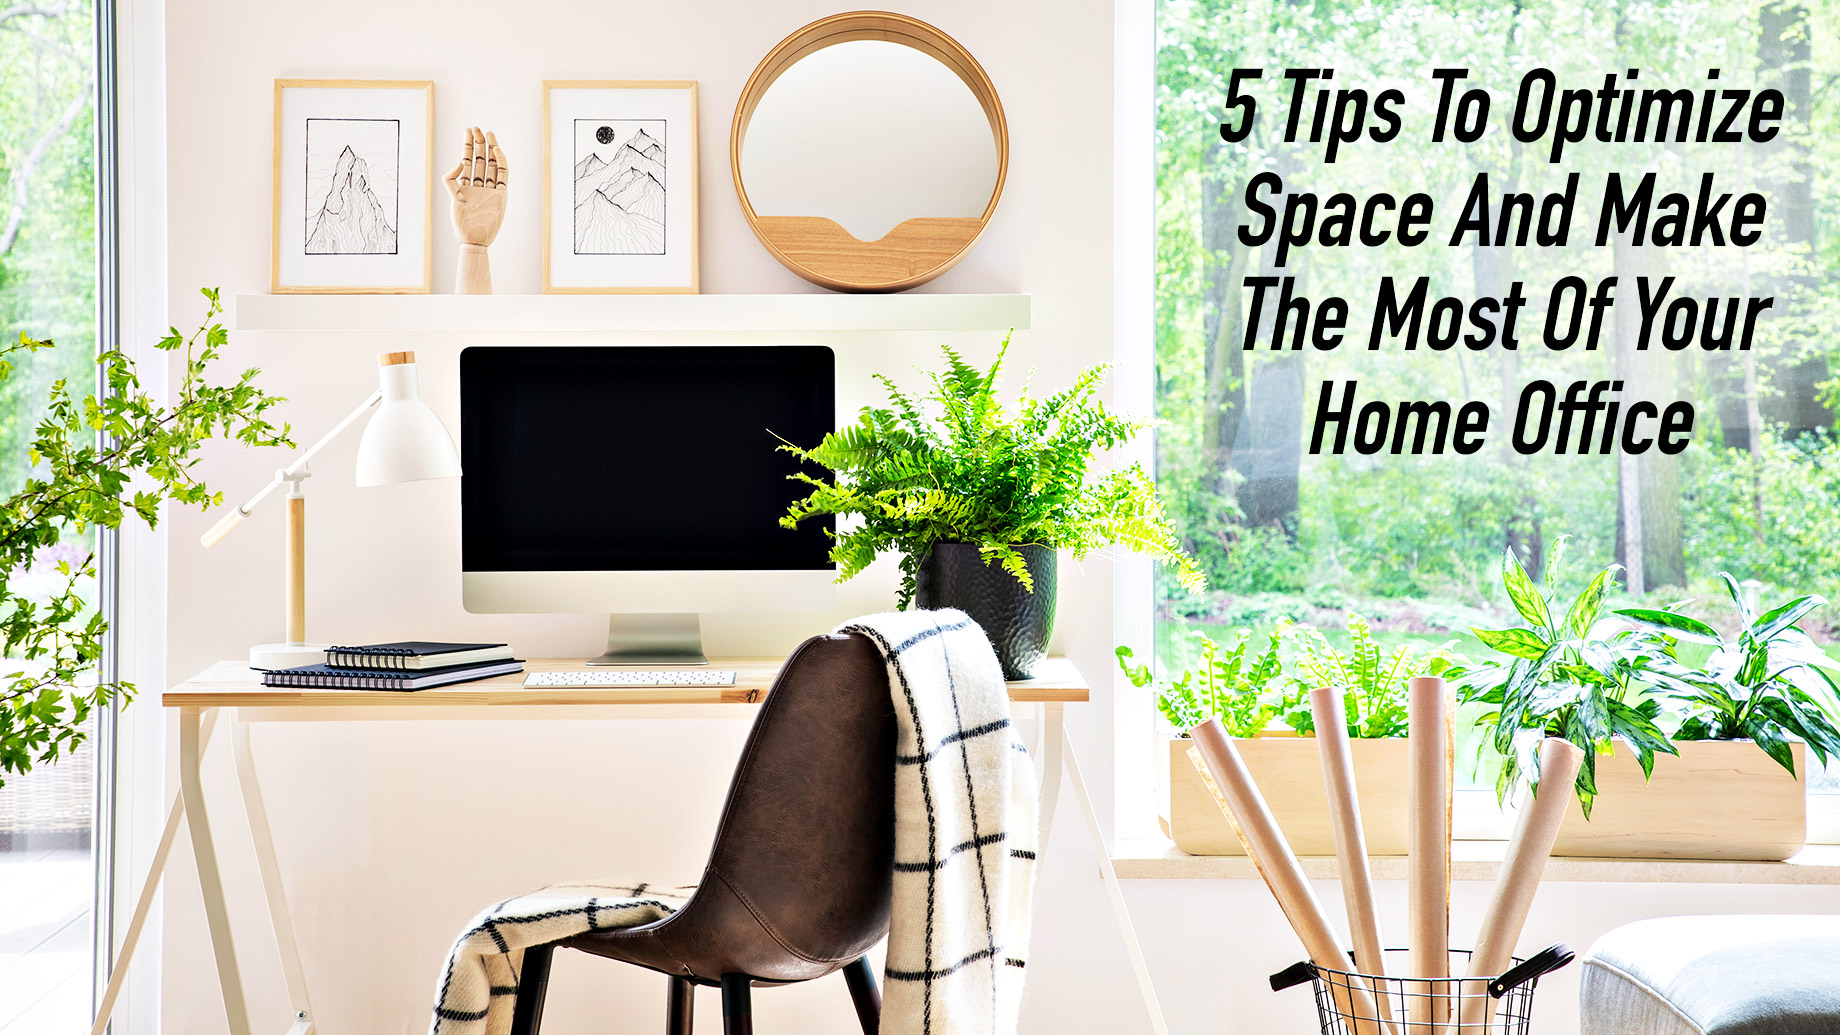 5 Tips To Optimize Space And Make The Most Of Your Home Office